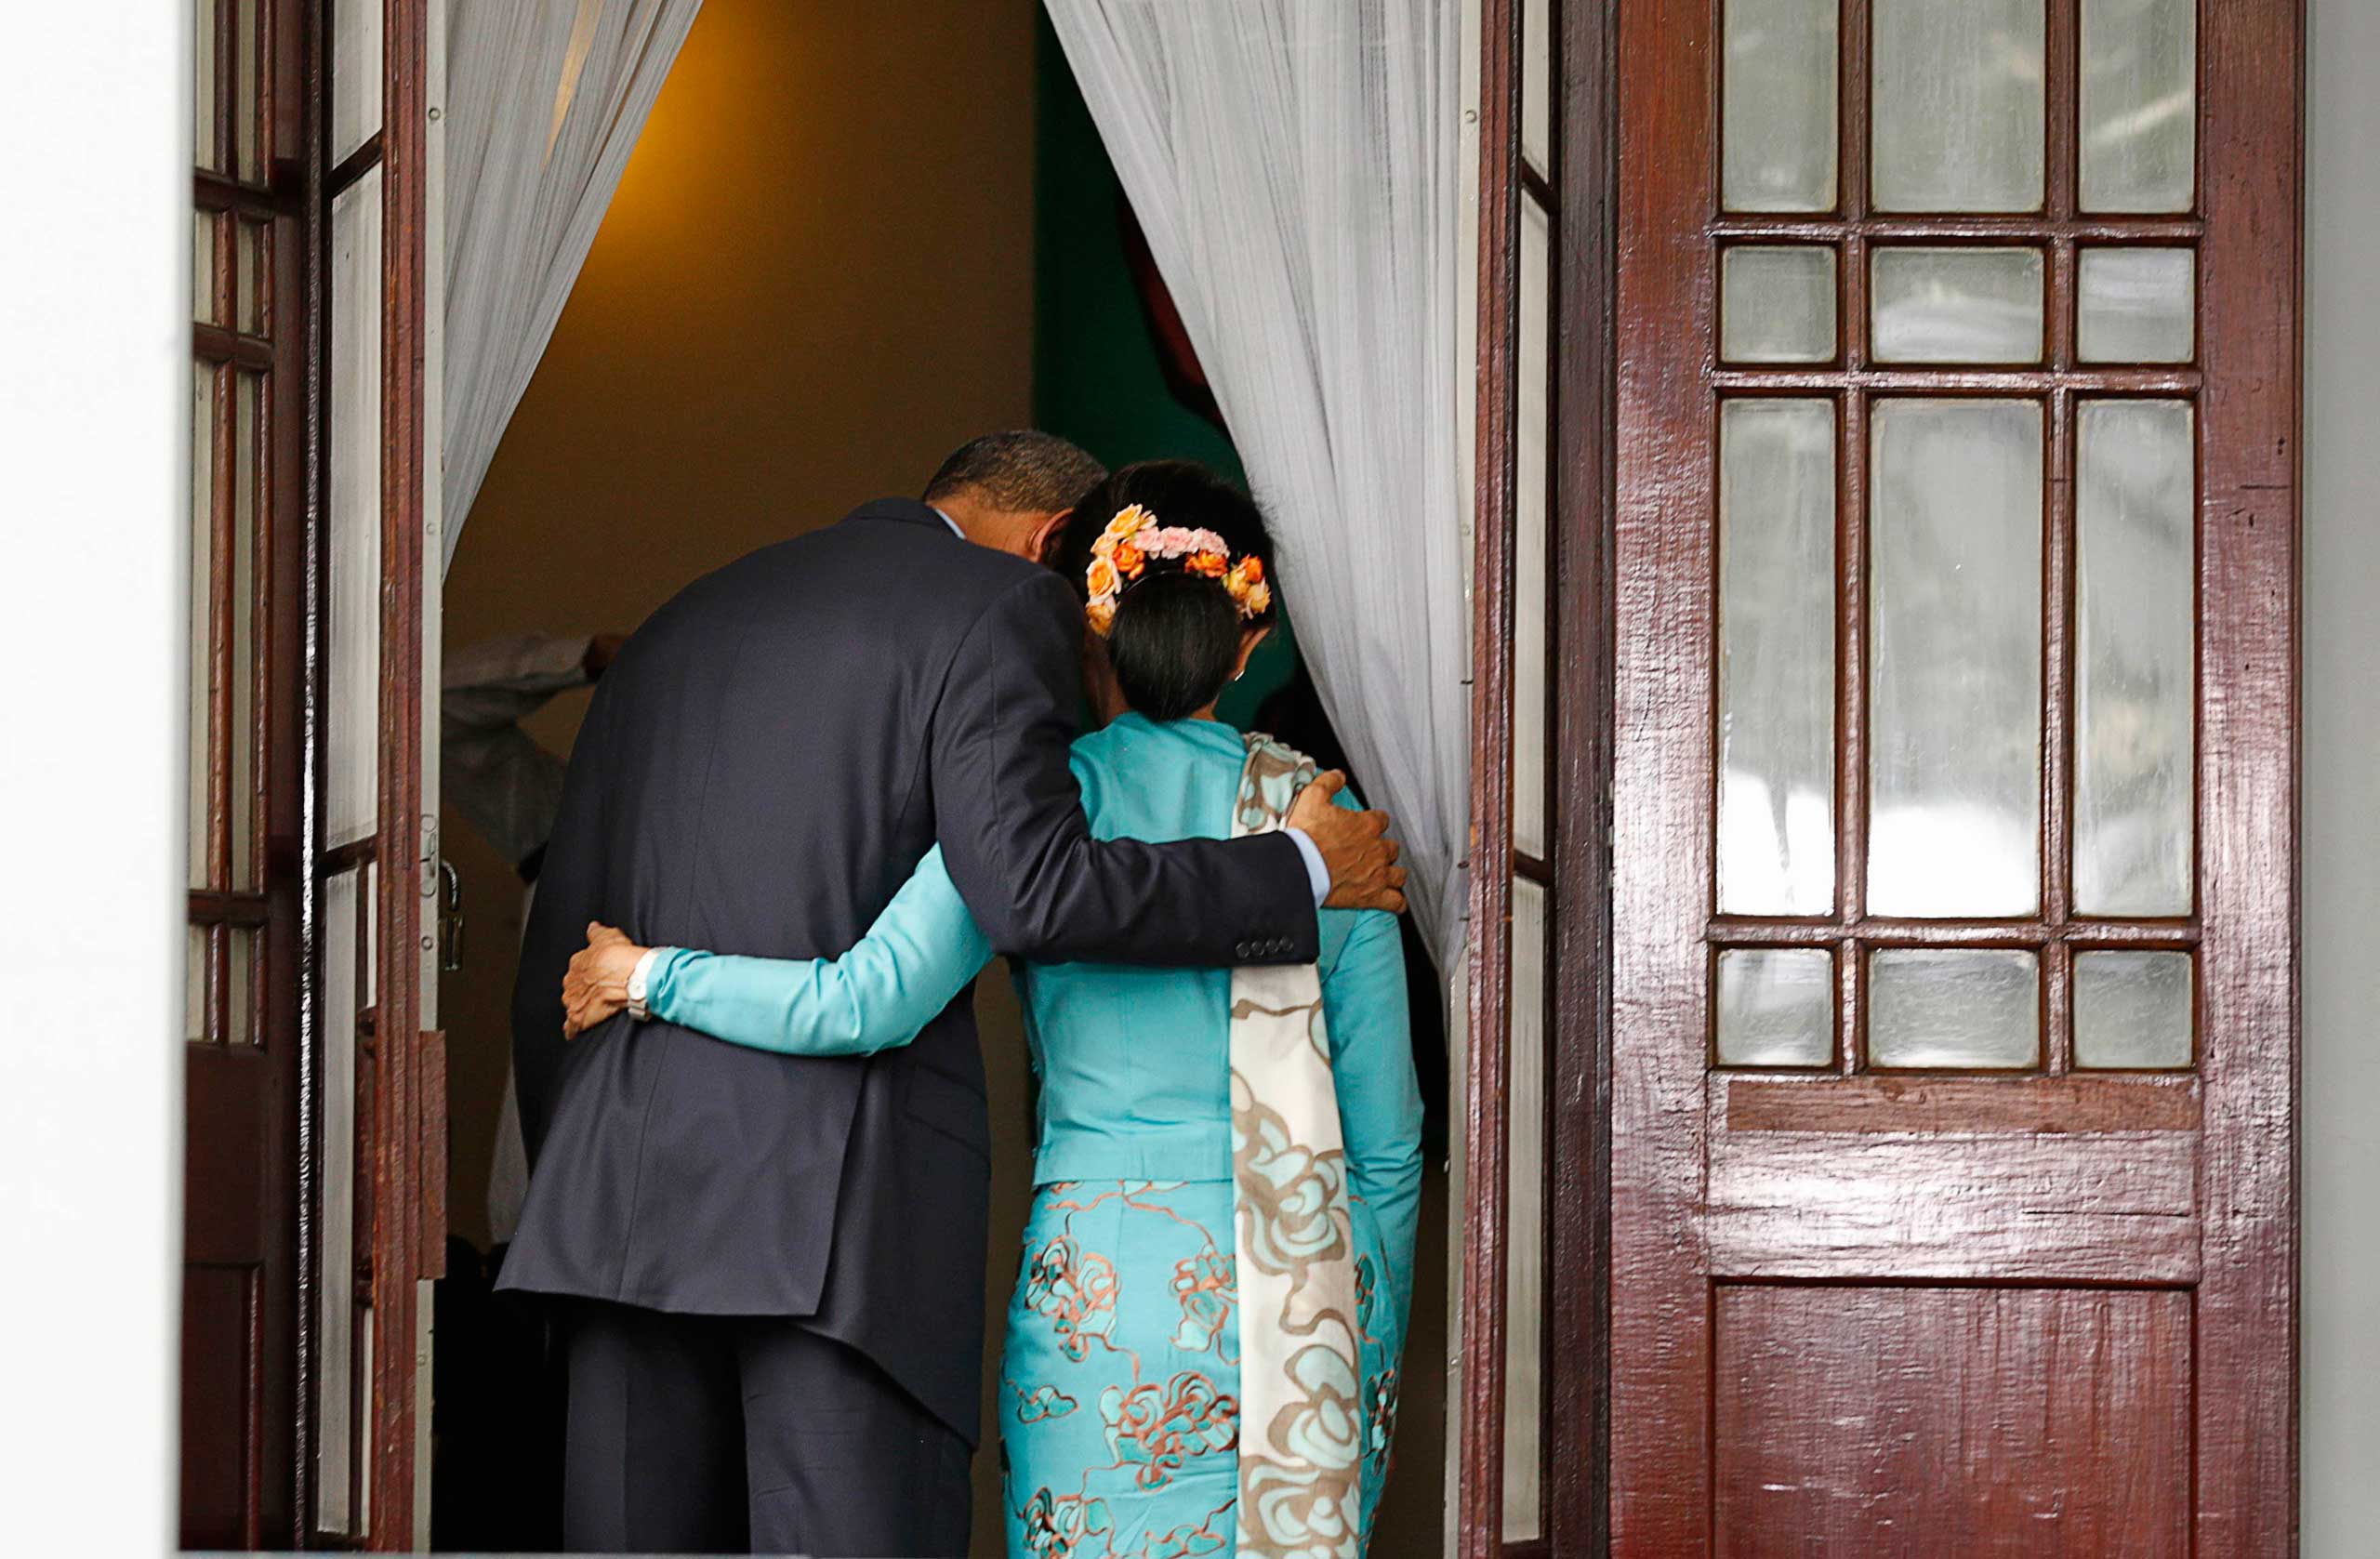 Nov. 14, 2014. U.S. President Barack Obama puts his arm around opposition politician Aung San Suu Kyi after a joint press conference following their meeting at her residence in Yangon. Obama said a provision in the Southeast Asian nation's constitution that prevents candidates from running for president because of their children's nationality made no sense.